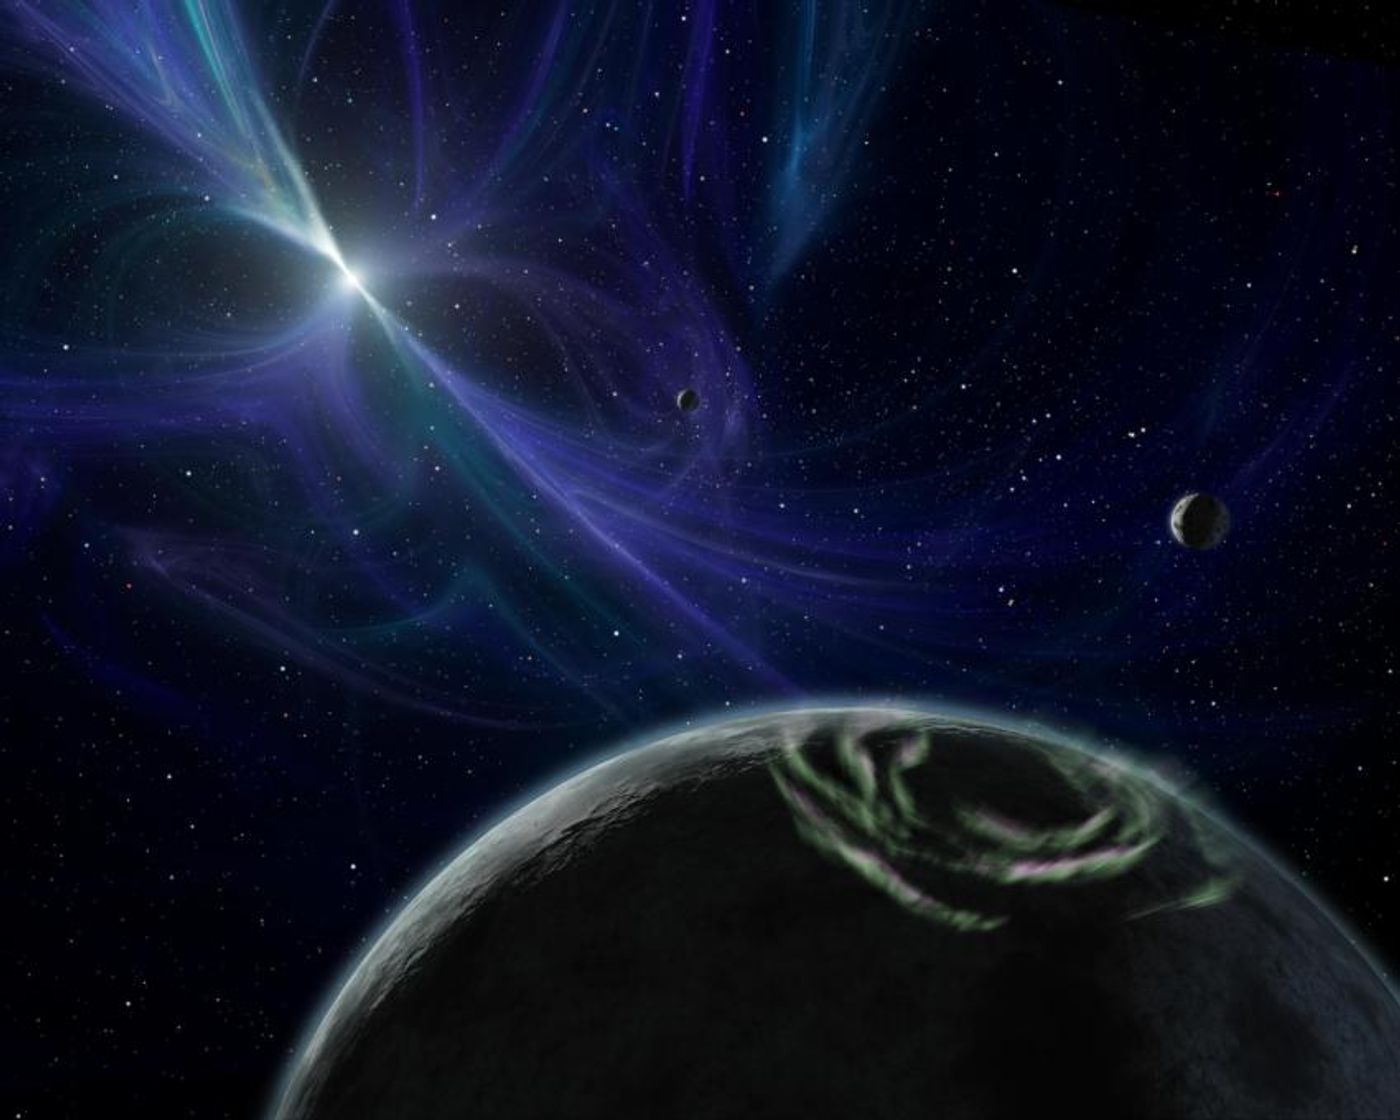 Artist impression of the pulsar-planet system PSR B1257+12 detected in 1992. The pulsar and three radiation-doused planets are all that remains of a dead star system. (Credit: NASA/JPL-Caltech)